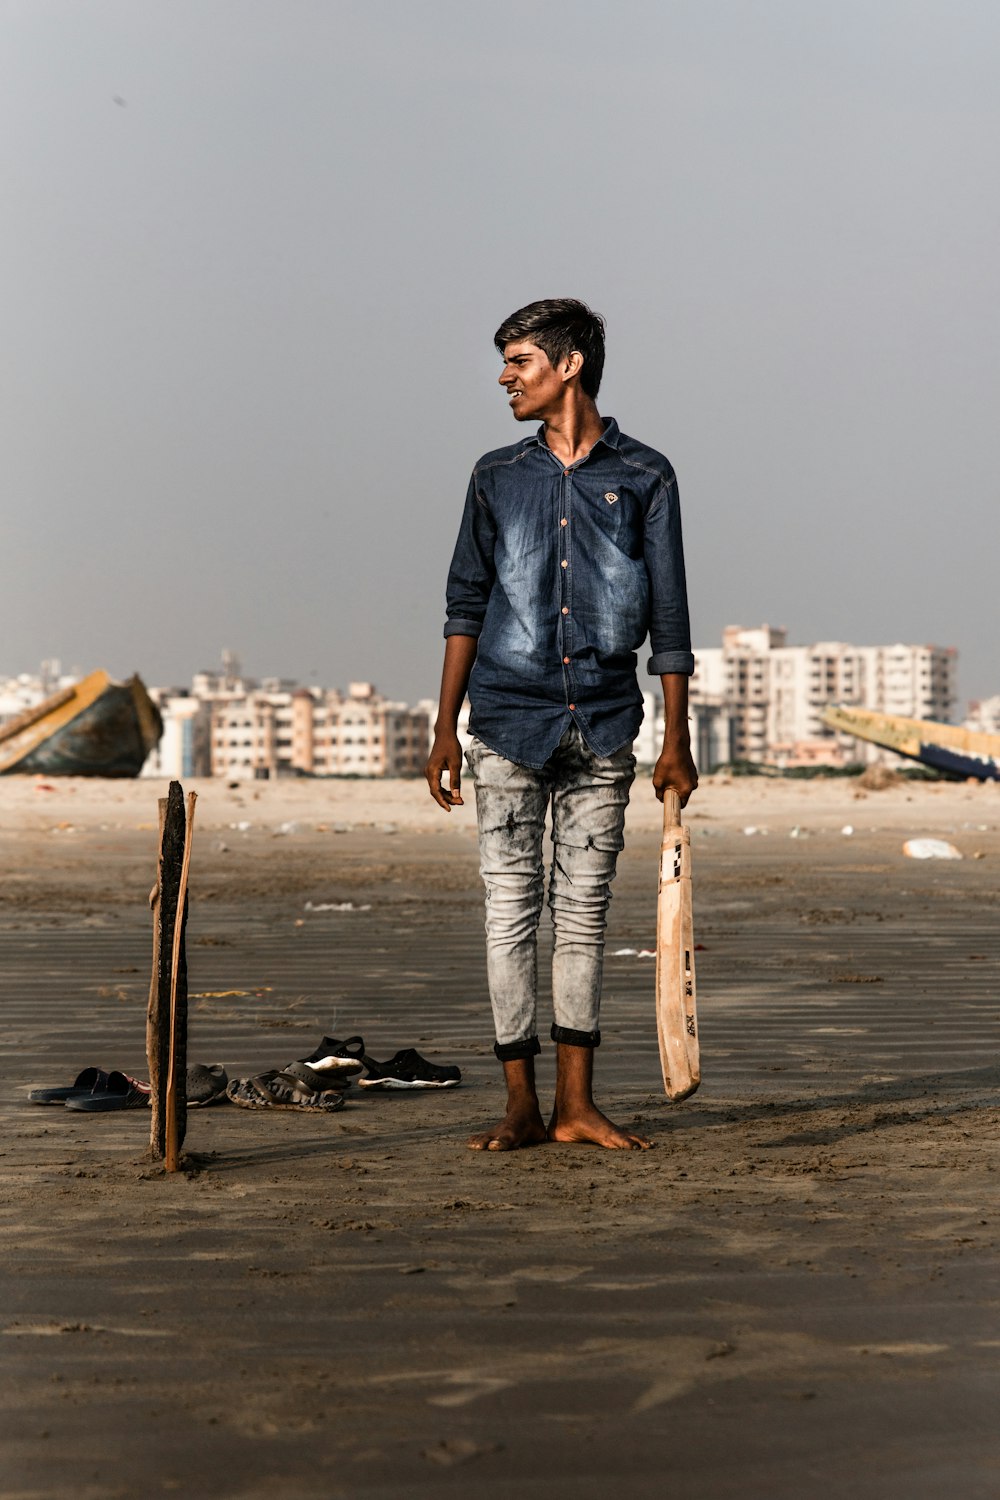 smiling man standing holding cricket bat while looking at right side during daytime